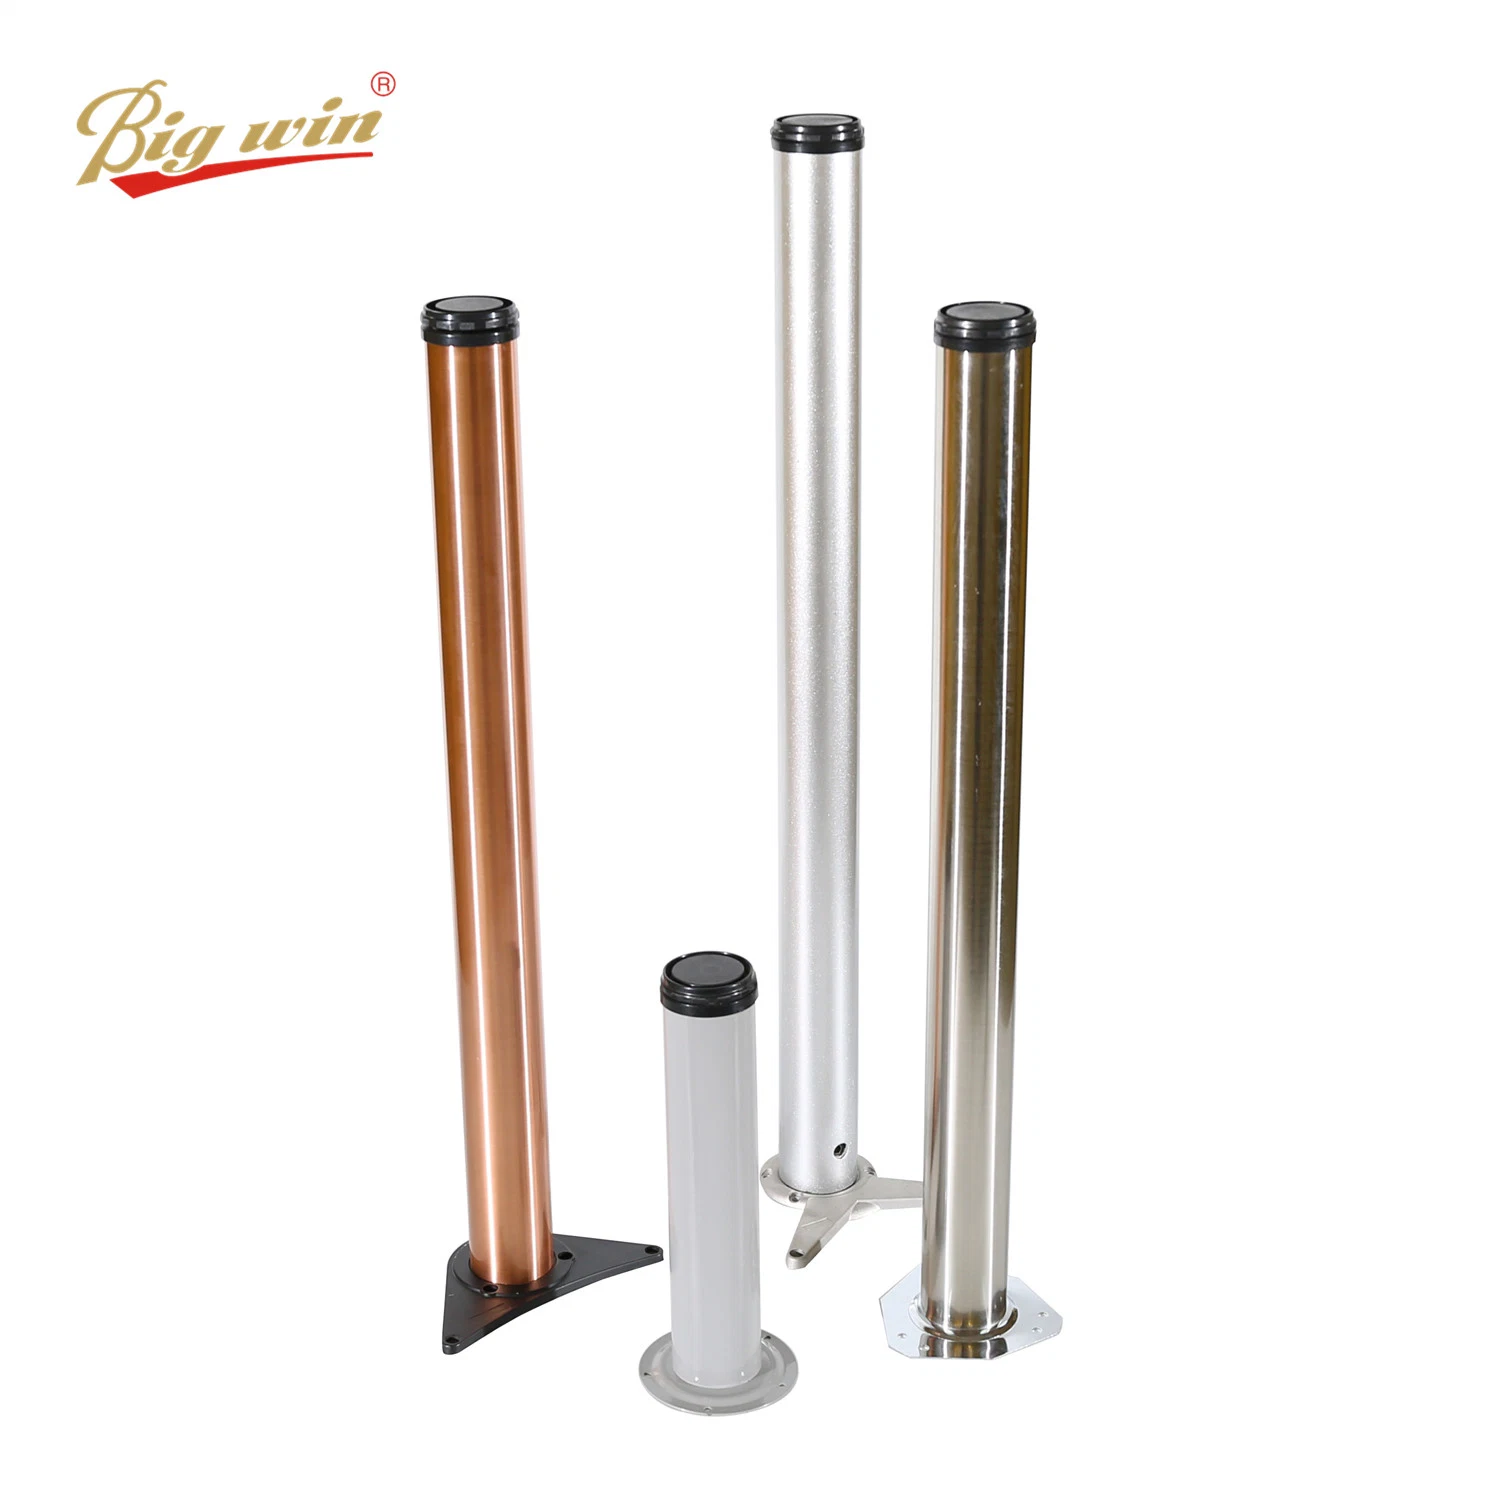 High quality/High cost performance Table Legs Furniture Hardware Accessories